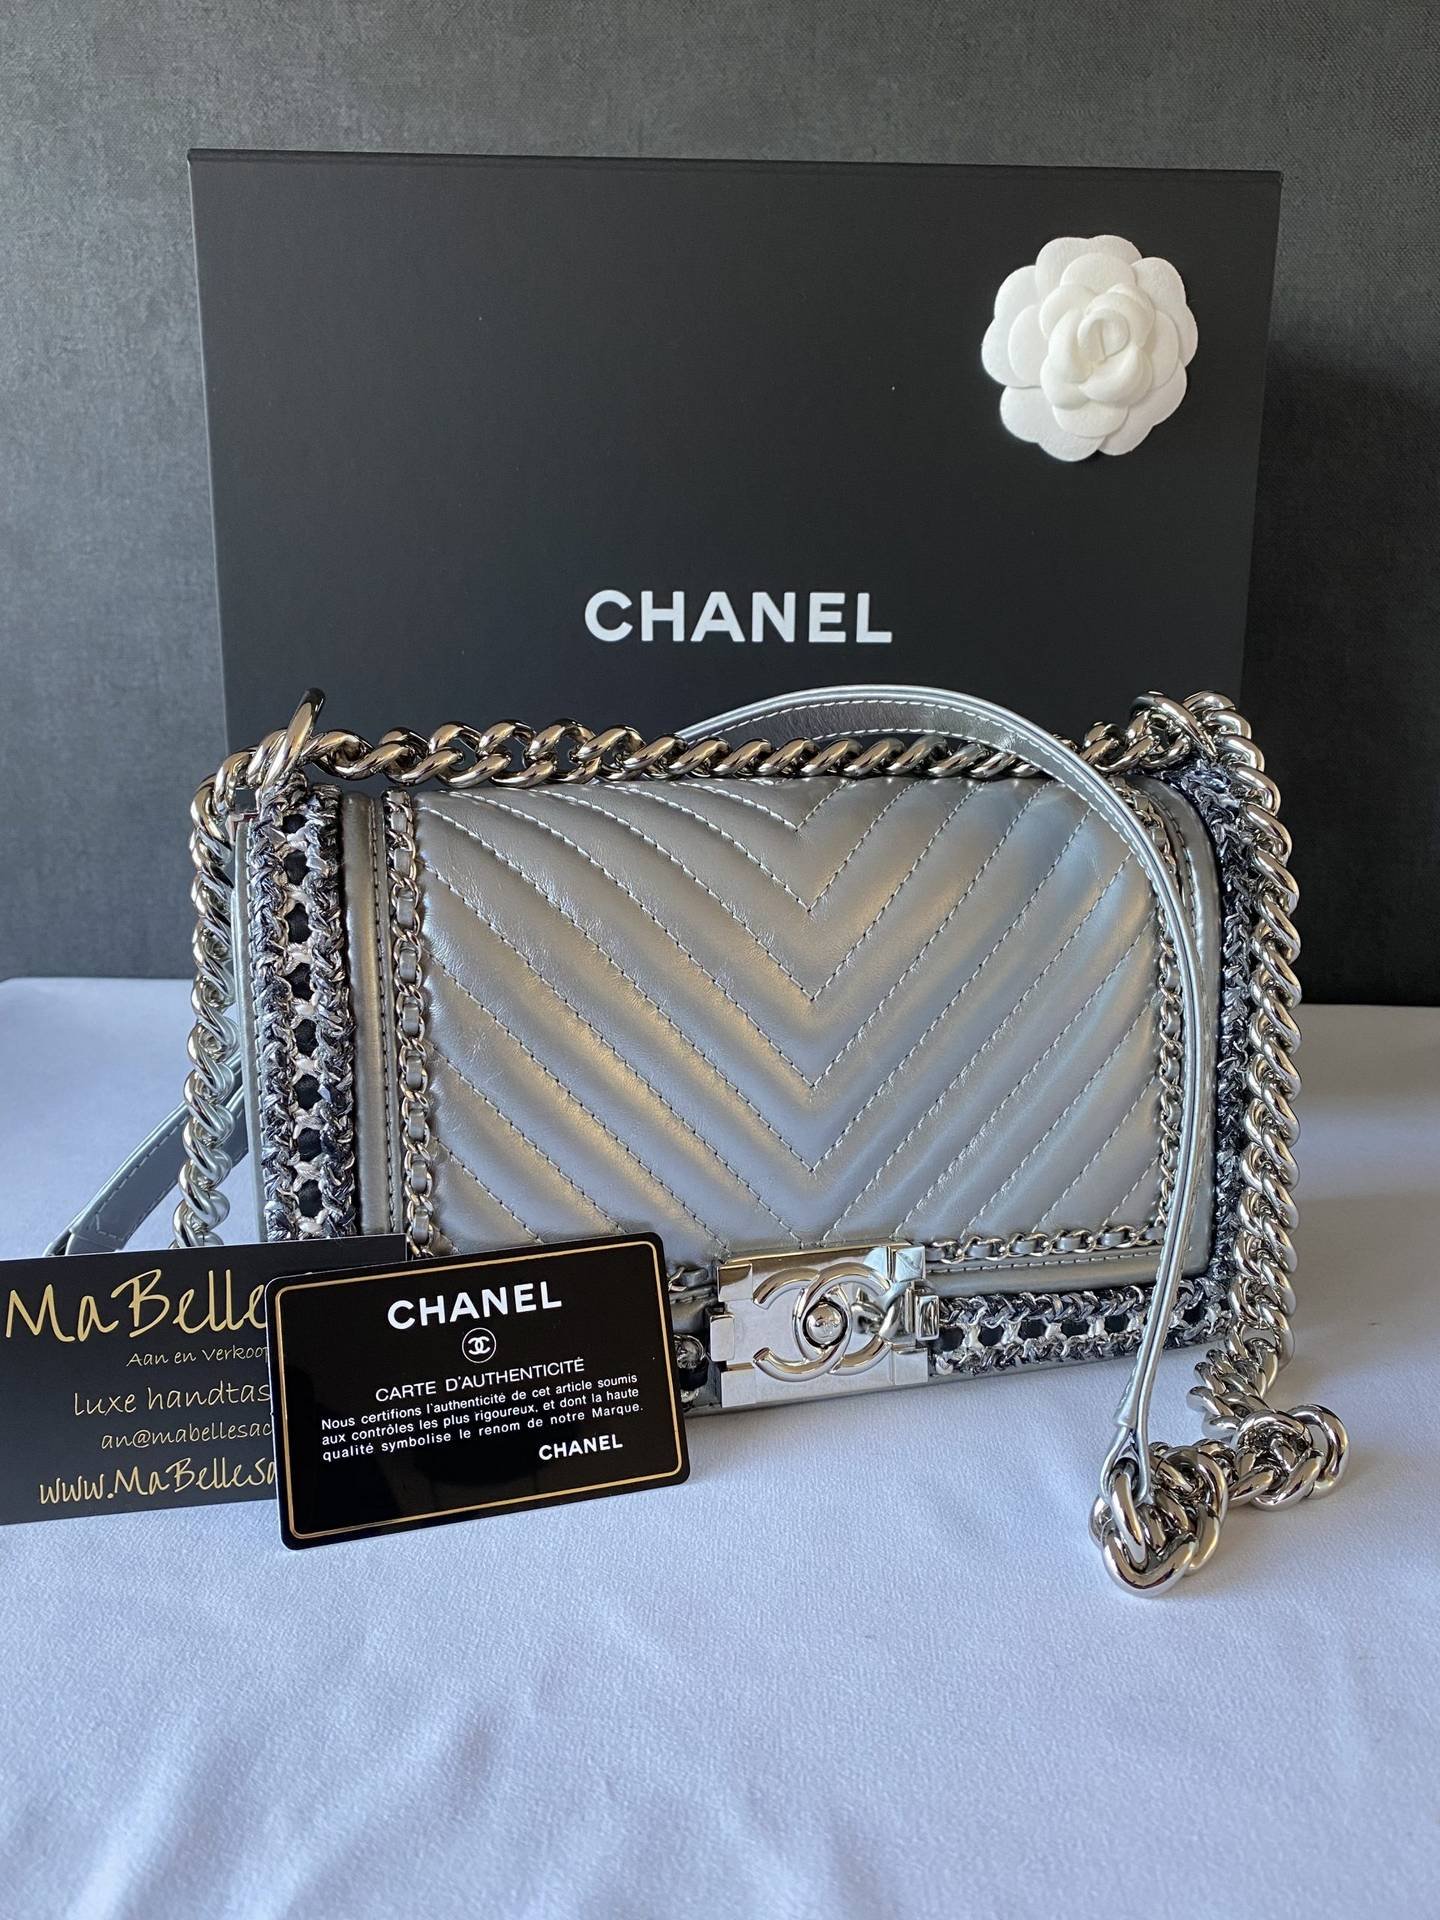 Chanel Releases Limited Edition 'Boy' Bag for Courchevel Boutique